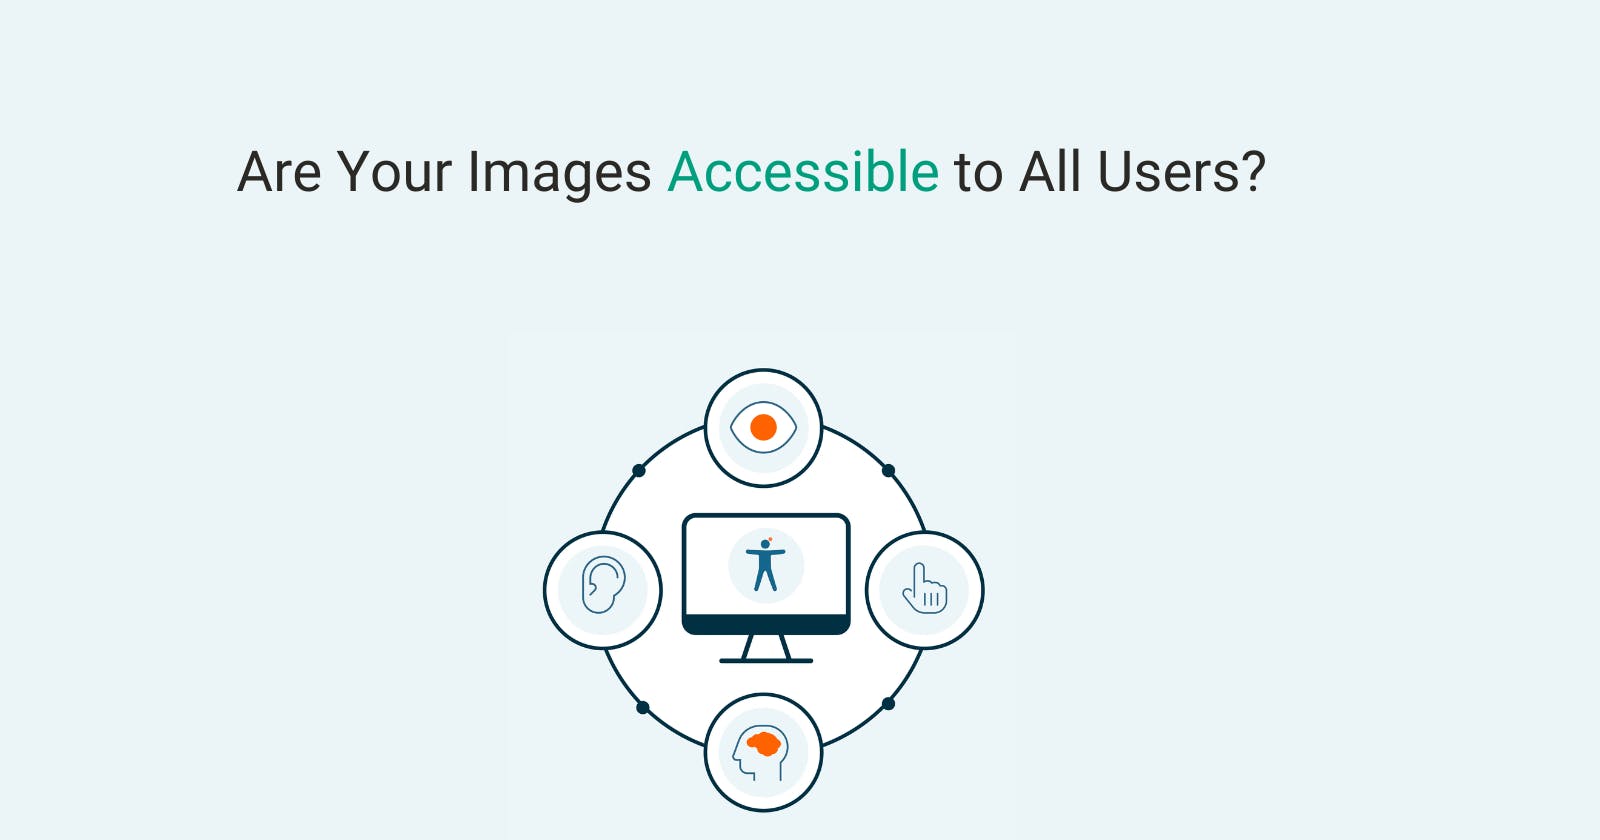 Images Are on Your Website, but Are They Accessible to All Users?